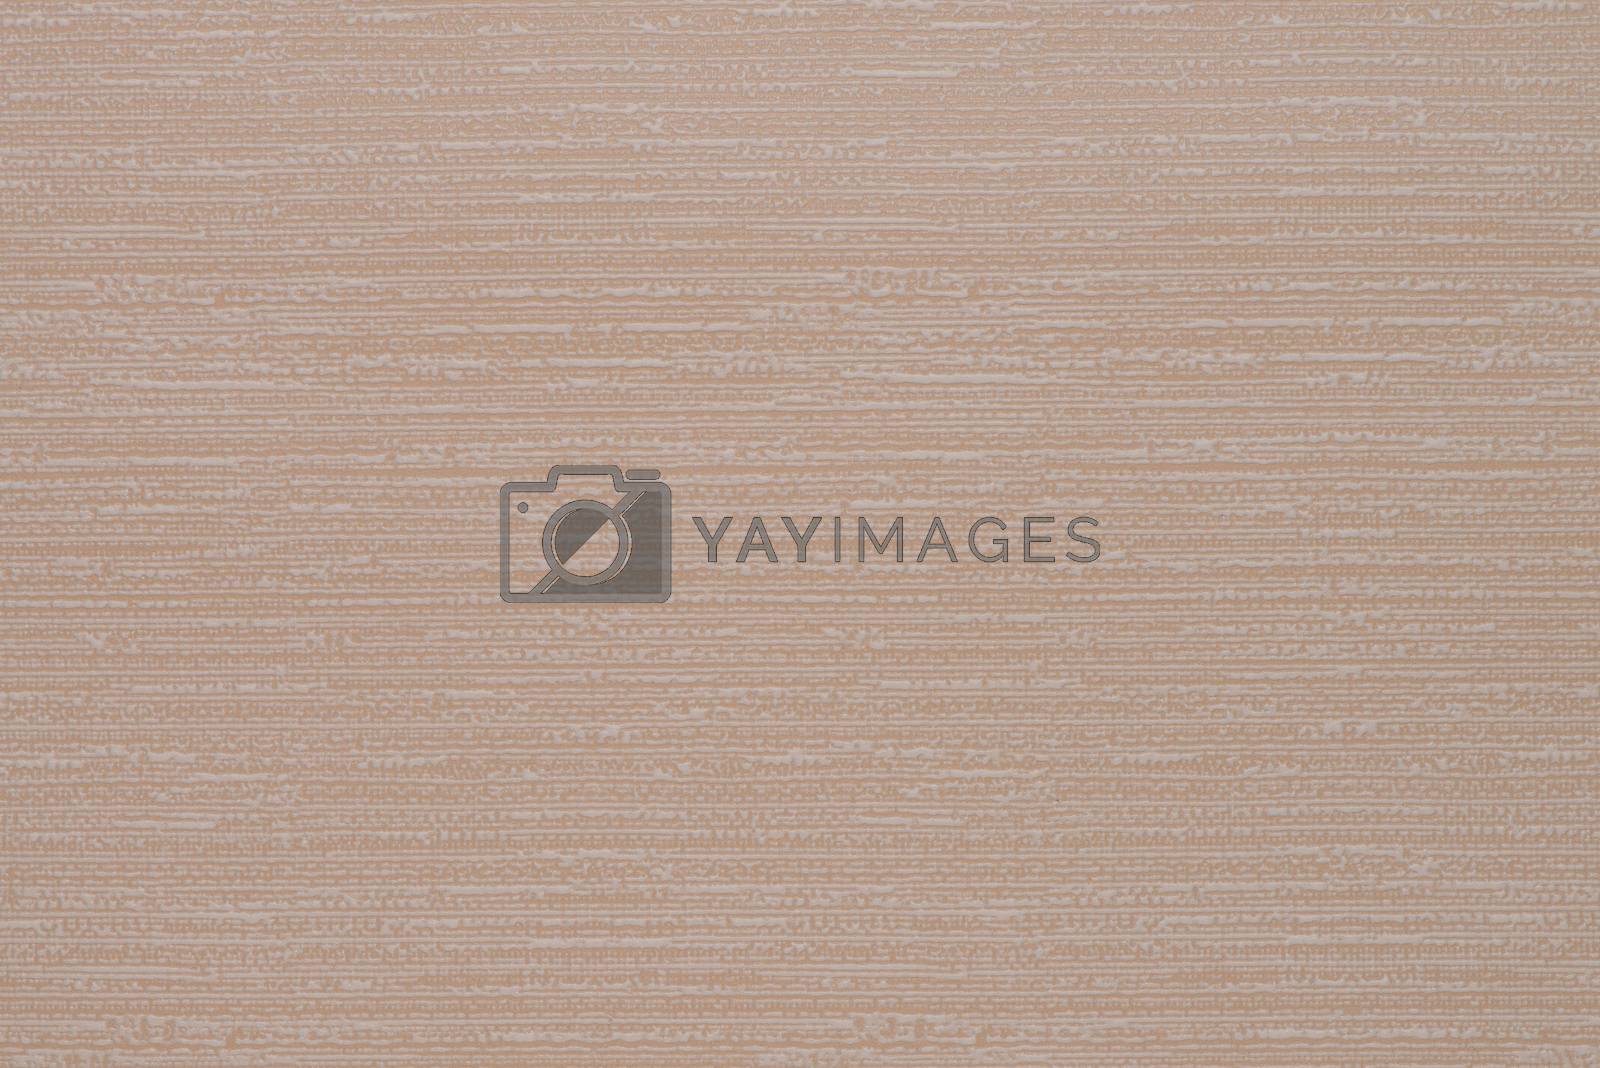 Royalty free image of Wallpaper texture by homydesign